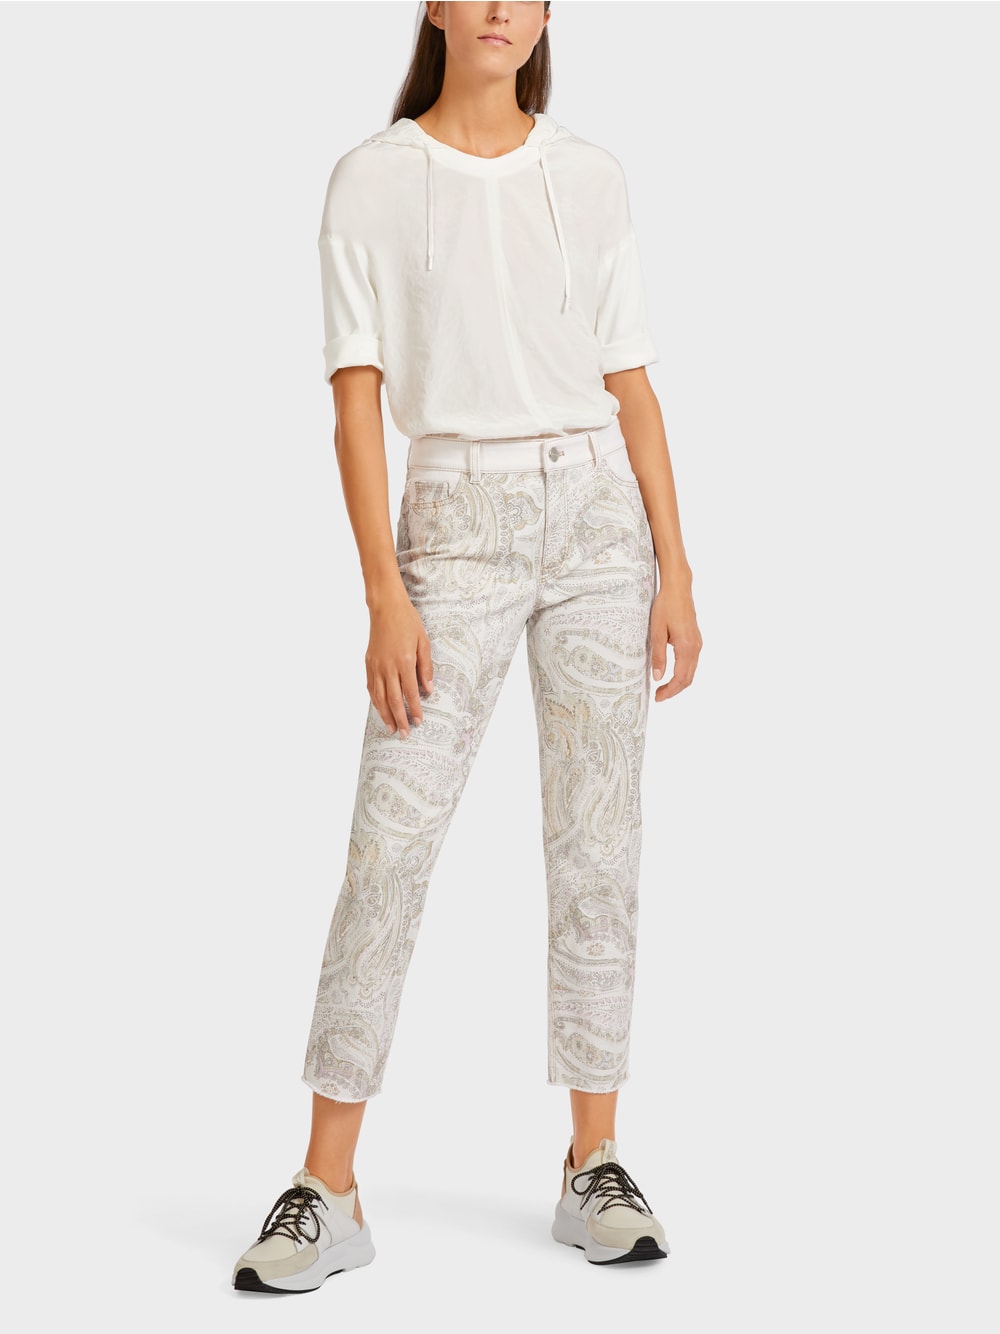 Marc Cain Paisley “Rethink Together” printed jeans